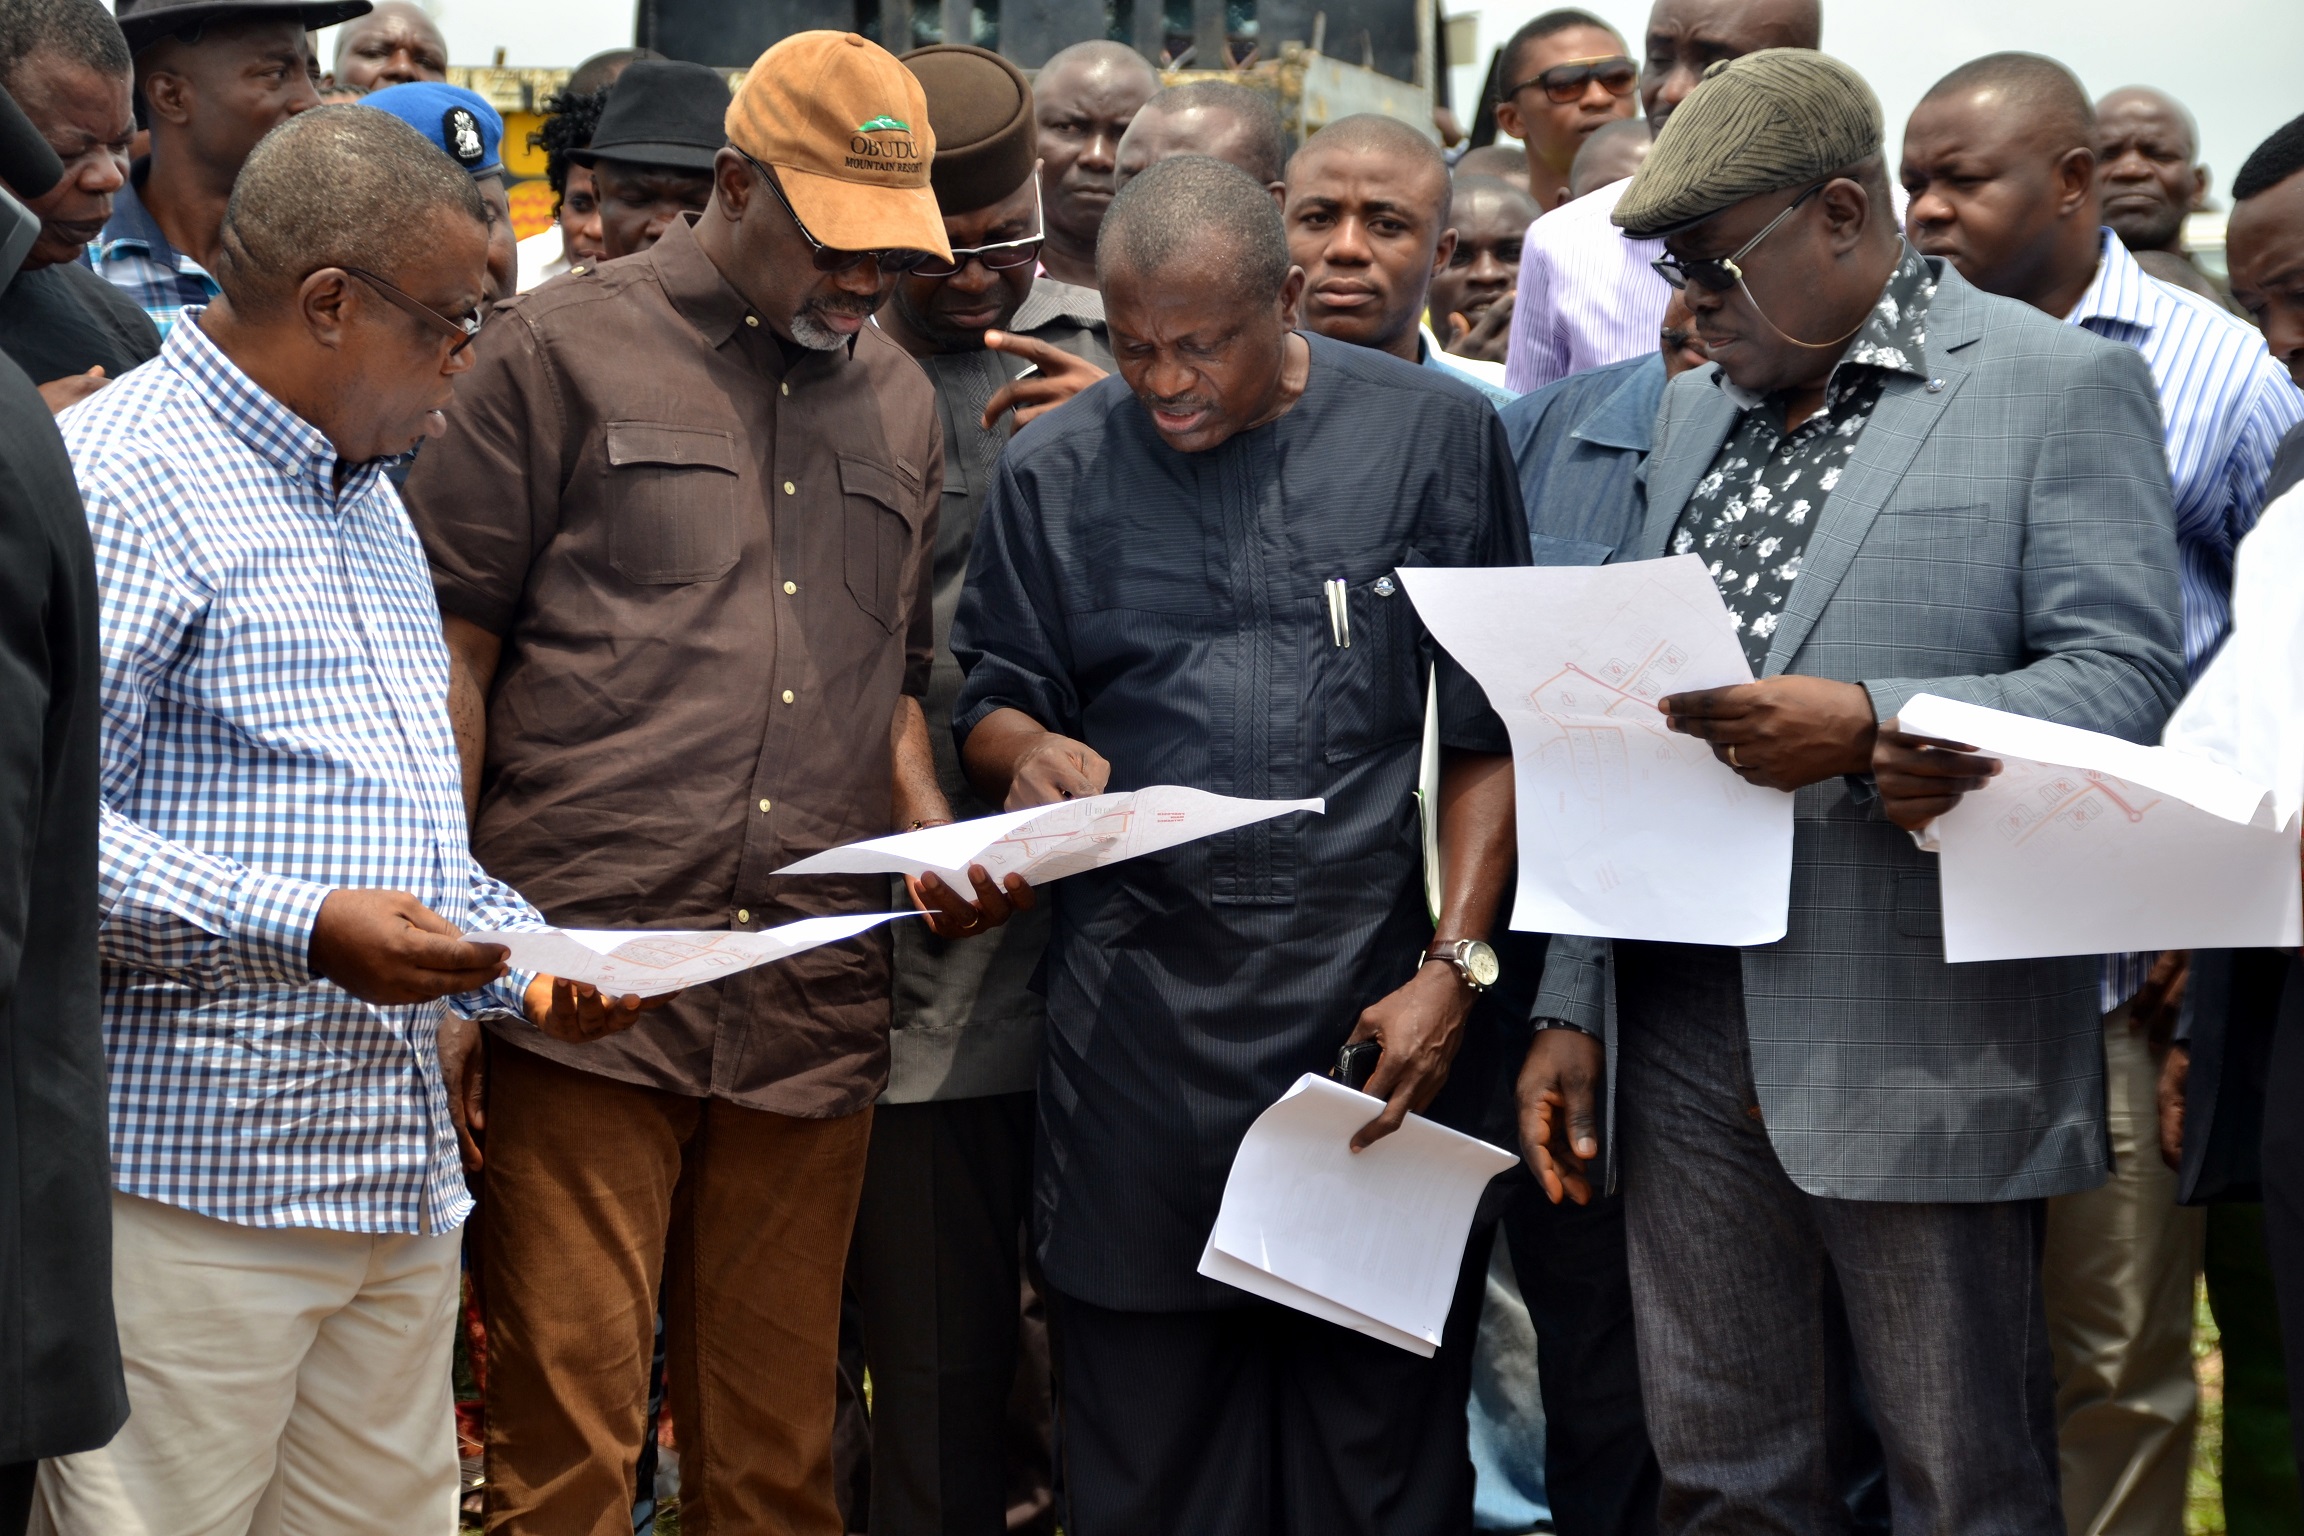 Cross River State Governor, Senator Liyel Imoke(2nd left) flanked by Chairman Planning Committee of the Institute of Technology and Management, Prof Ivara Esu(L), Commissioner for Special Projects, Mr. Bassey Ika Oqua and Deputy Governor Mr. Efiok Cobham(R)examining the building plan of the proposed Institute in Ugep, Yakurr Local Government Area yesterday